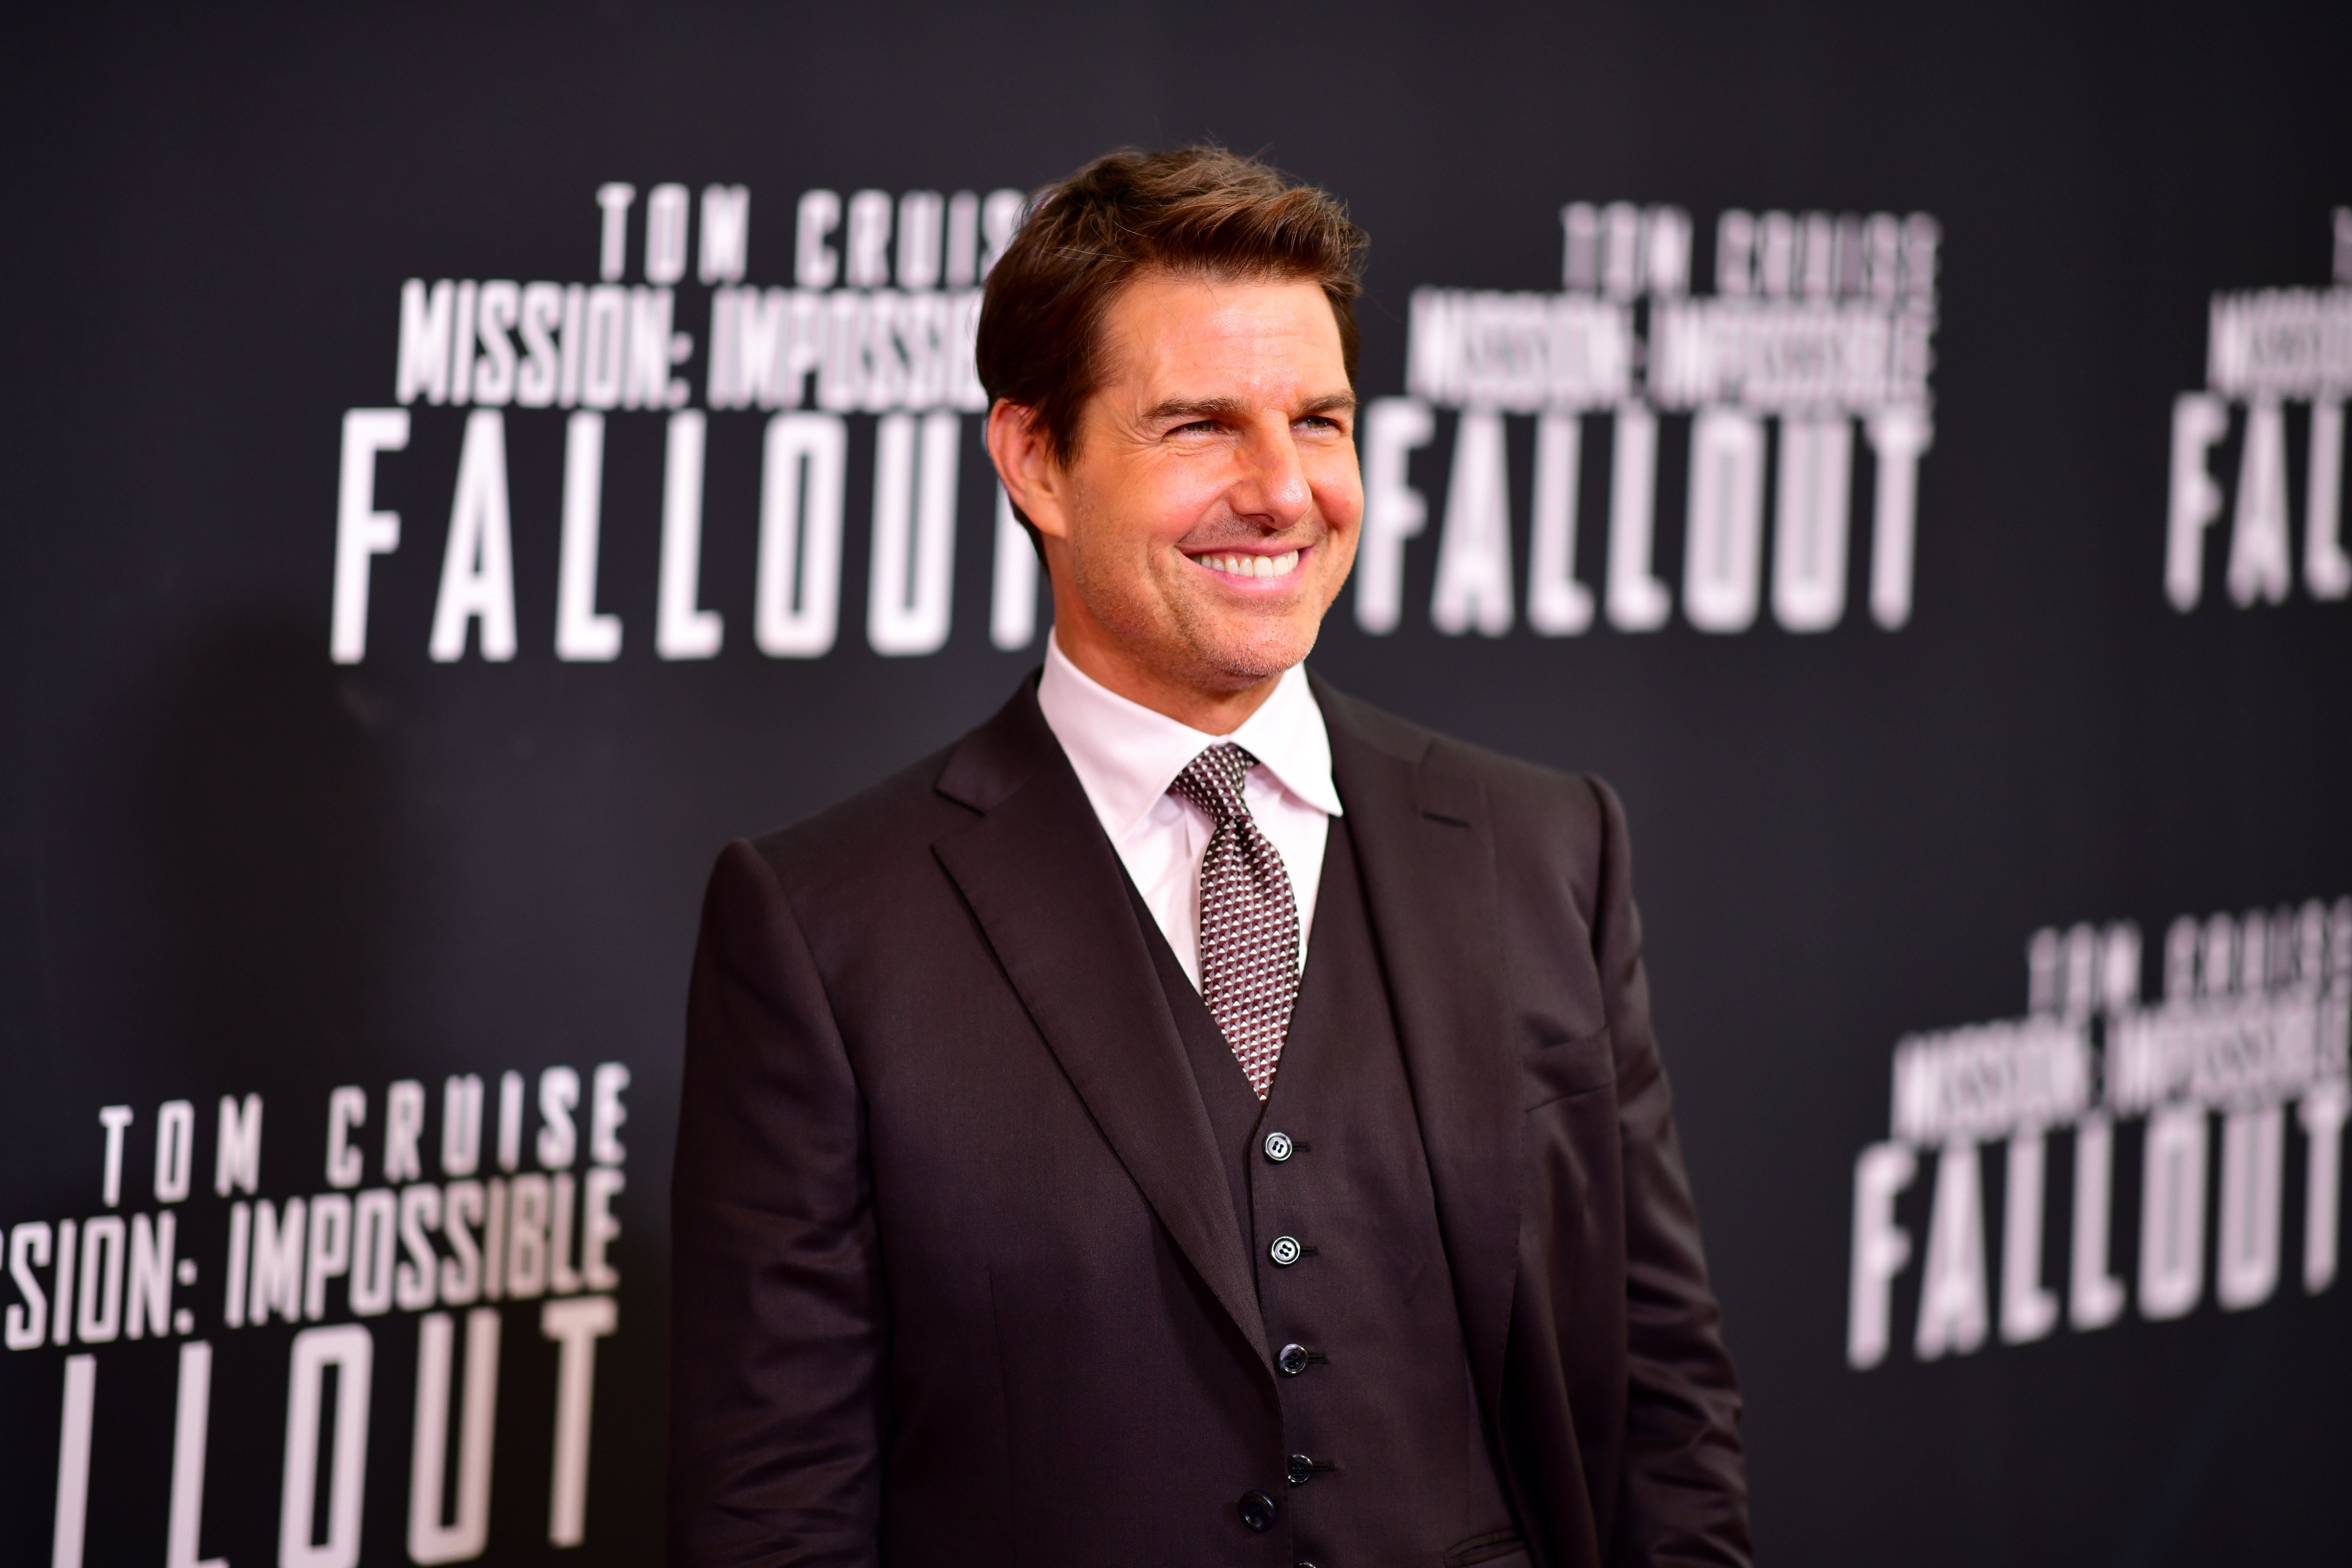 Tom Cruise at the 'Mission: Impossible - Fallout' U.S. Premiere at Lockheed Martin IMAX Theater at the Smithsonian National Air & Space Museum on July 22, 2018 | Photo: Getty Images